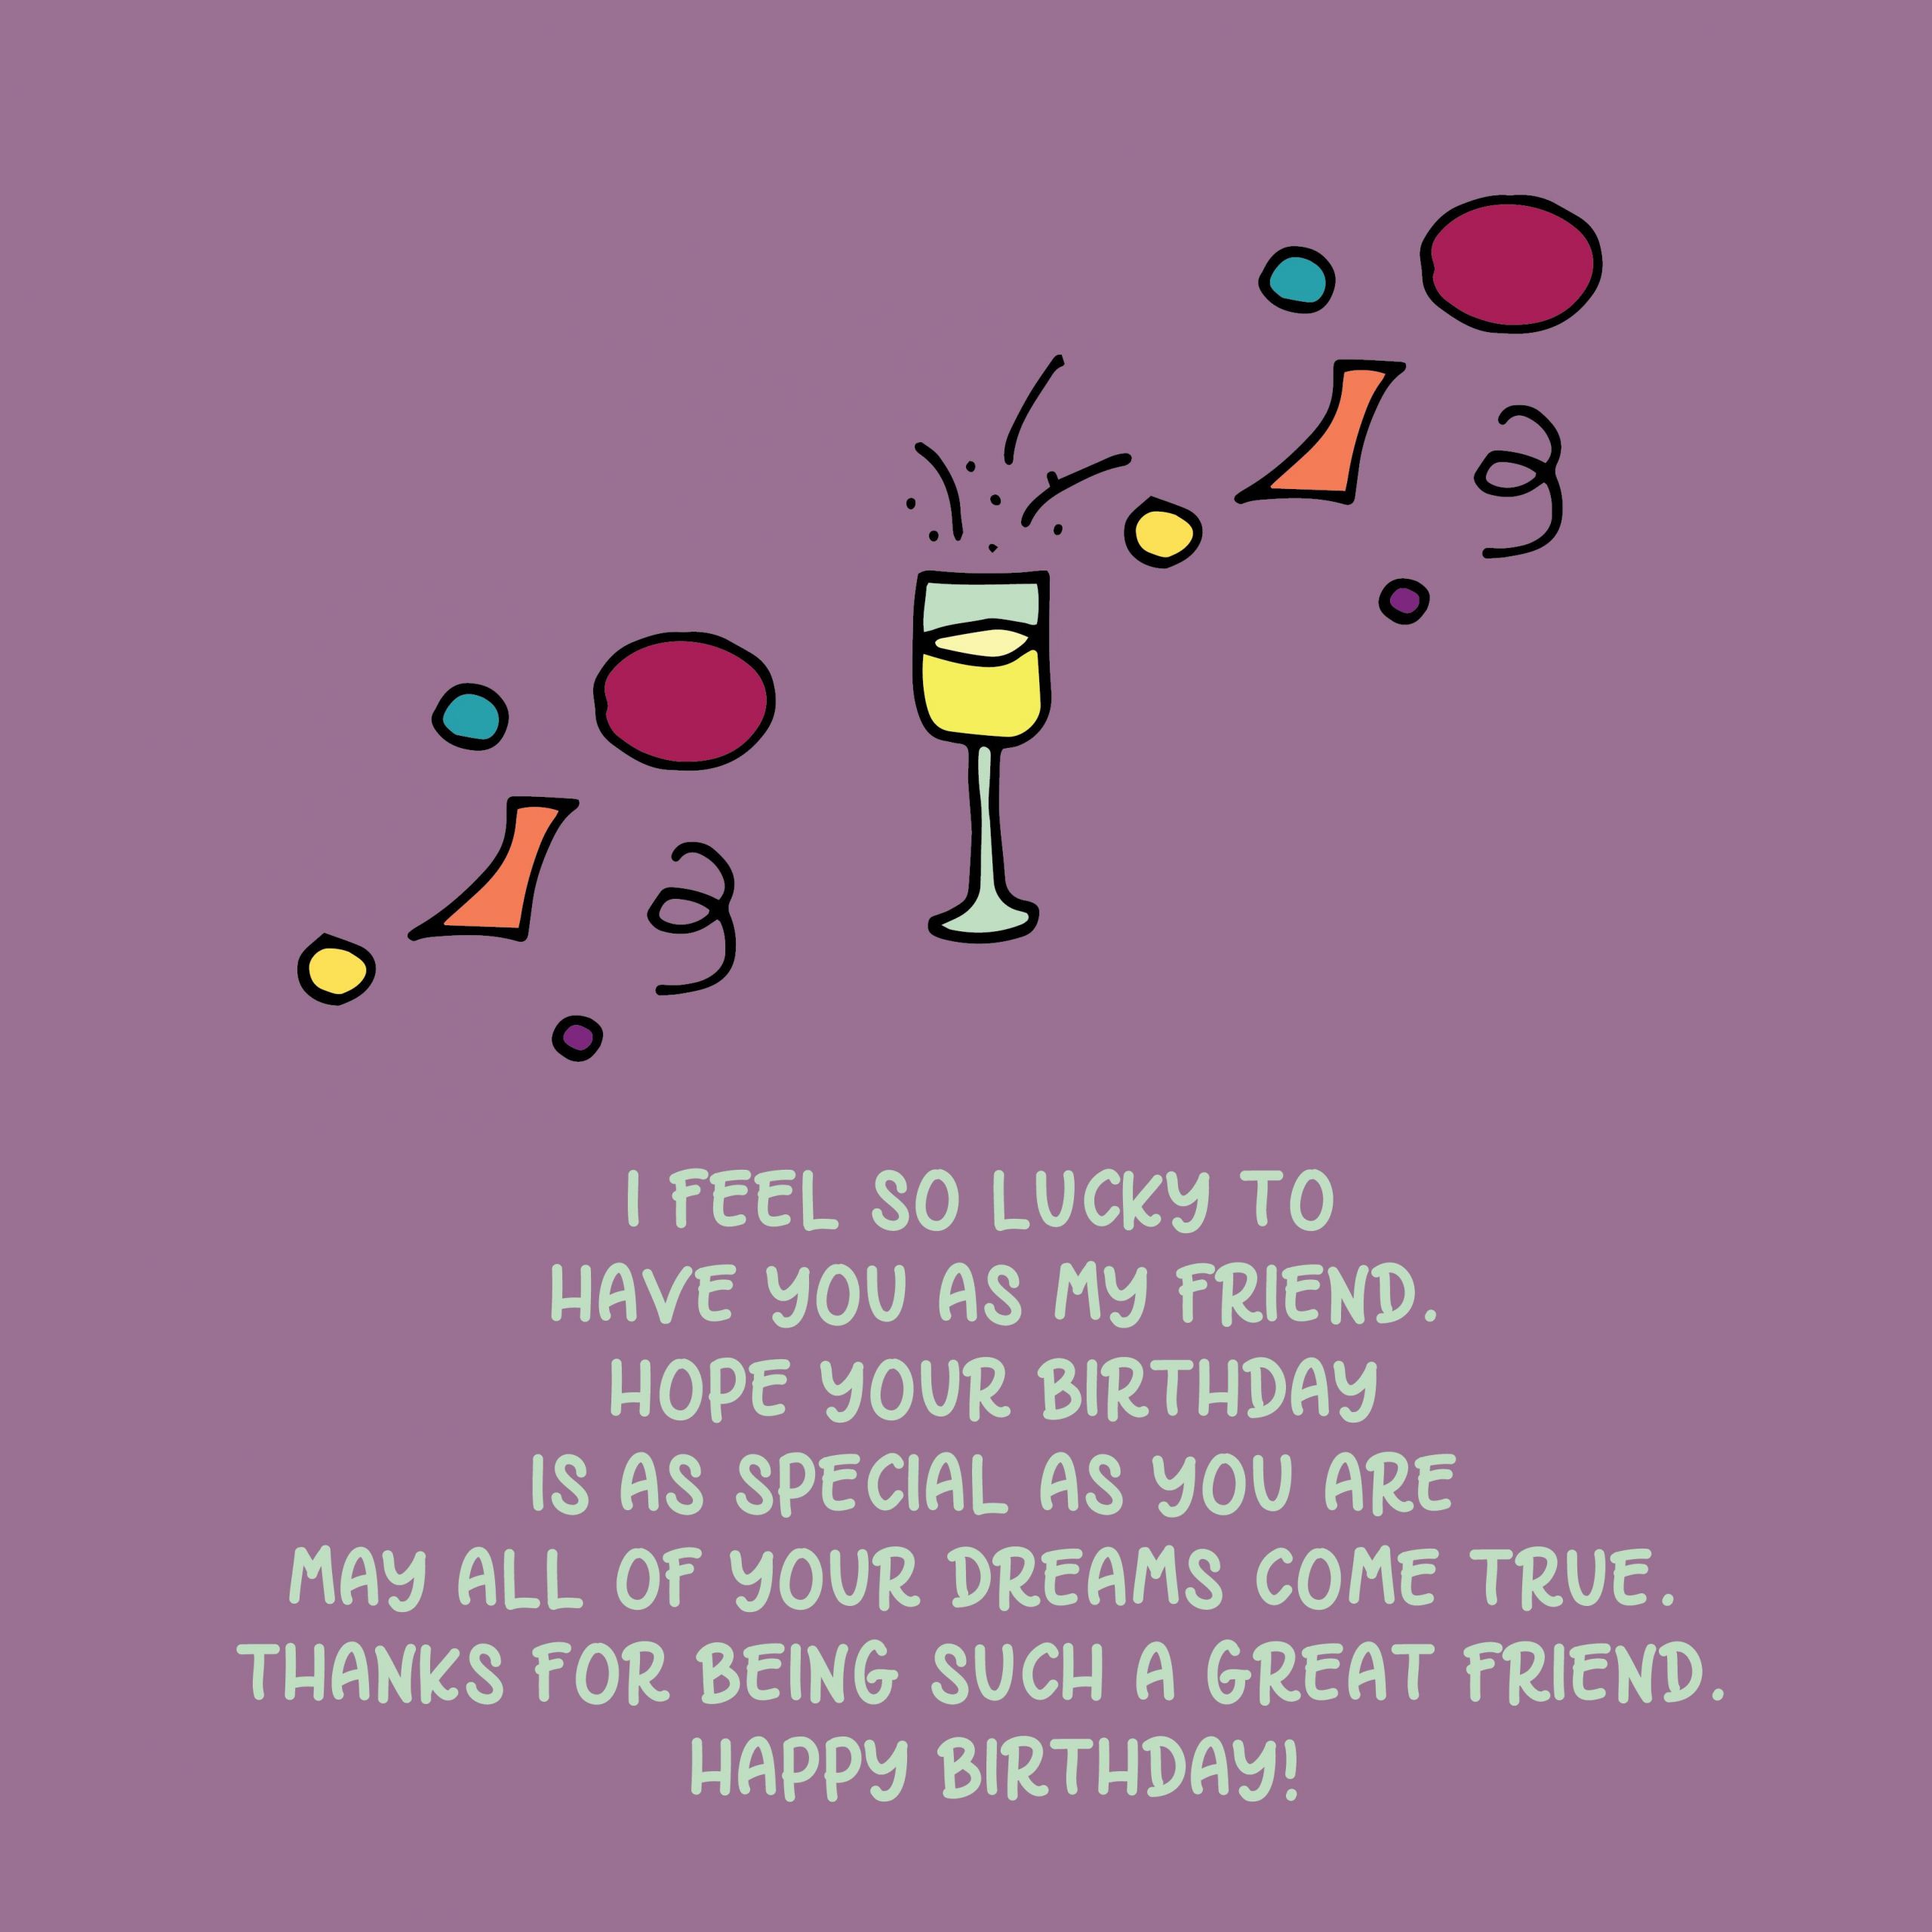 Happy Birthday To Friend Quote
 Happy Birthday Quotes and Wishes for Friends Top Happy